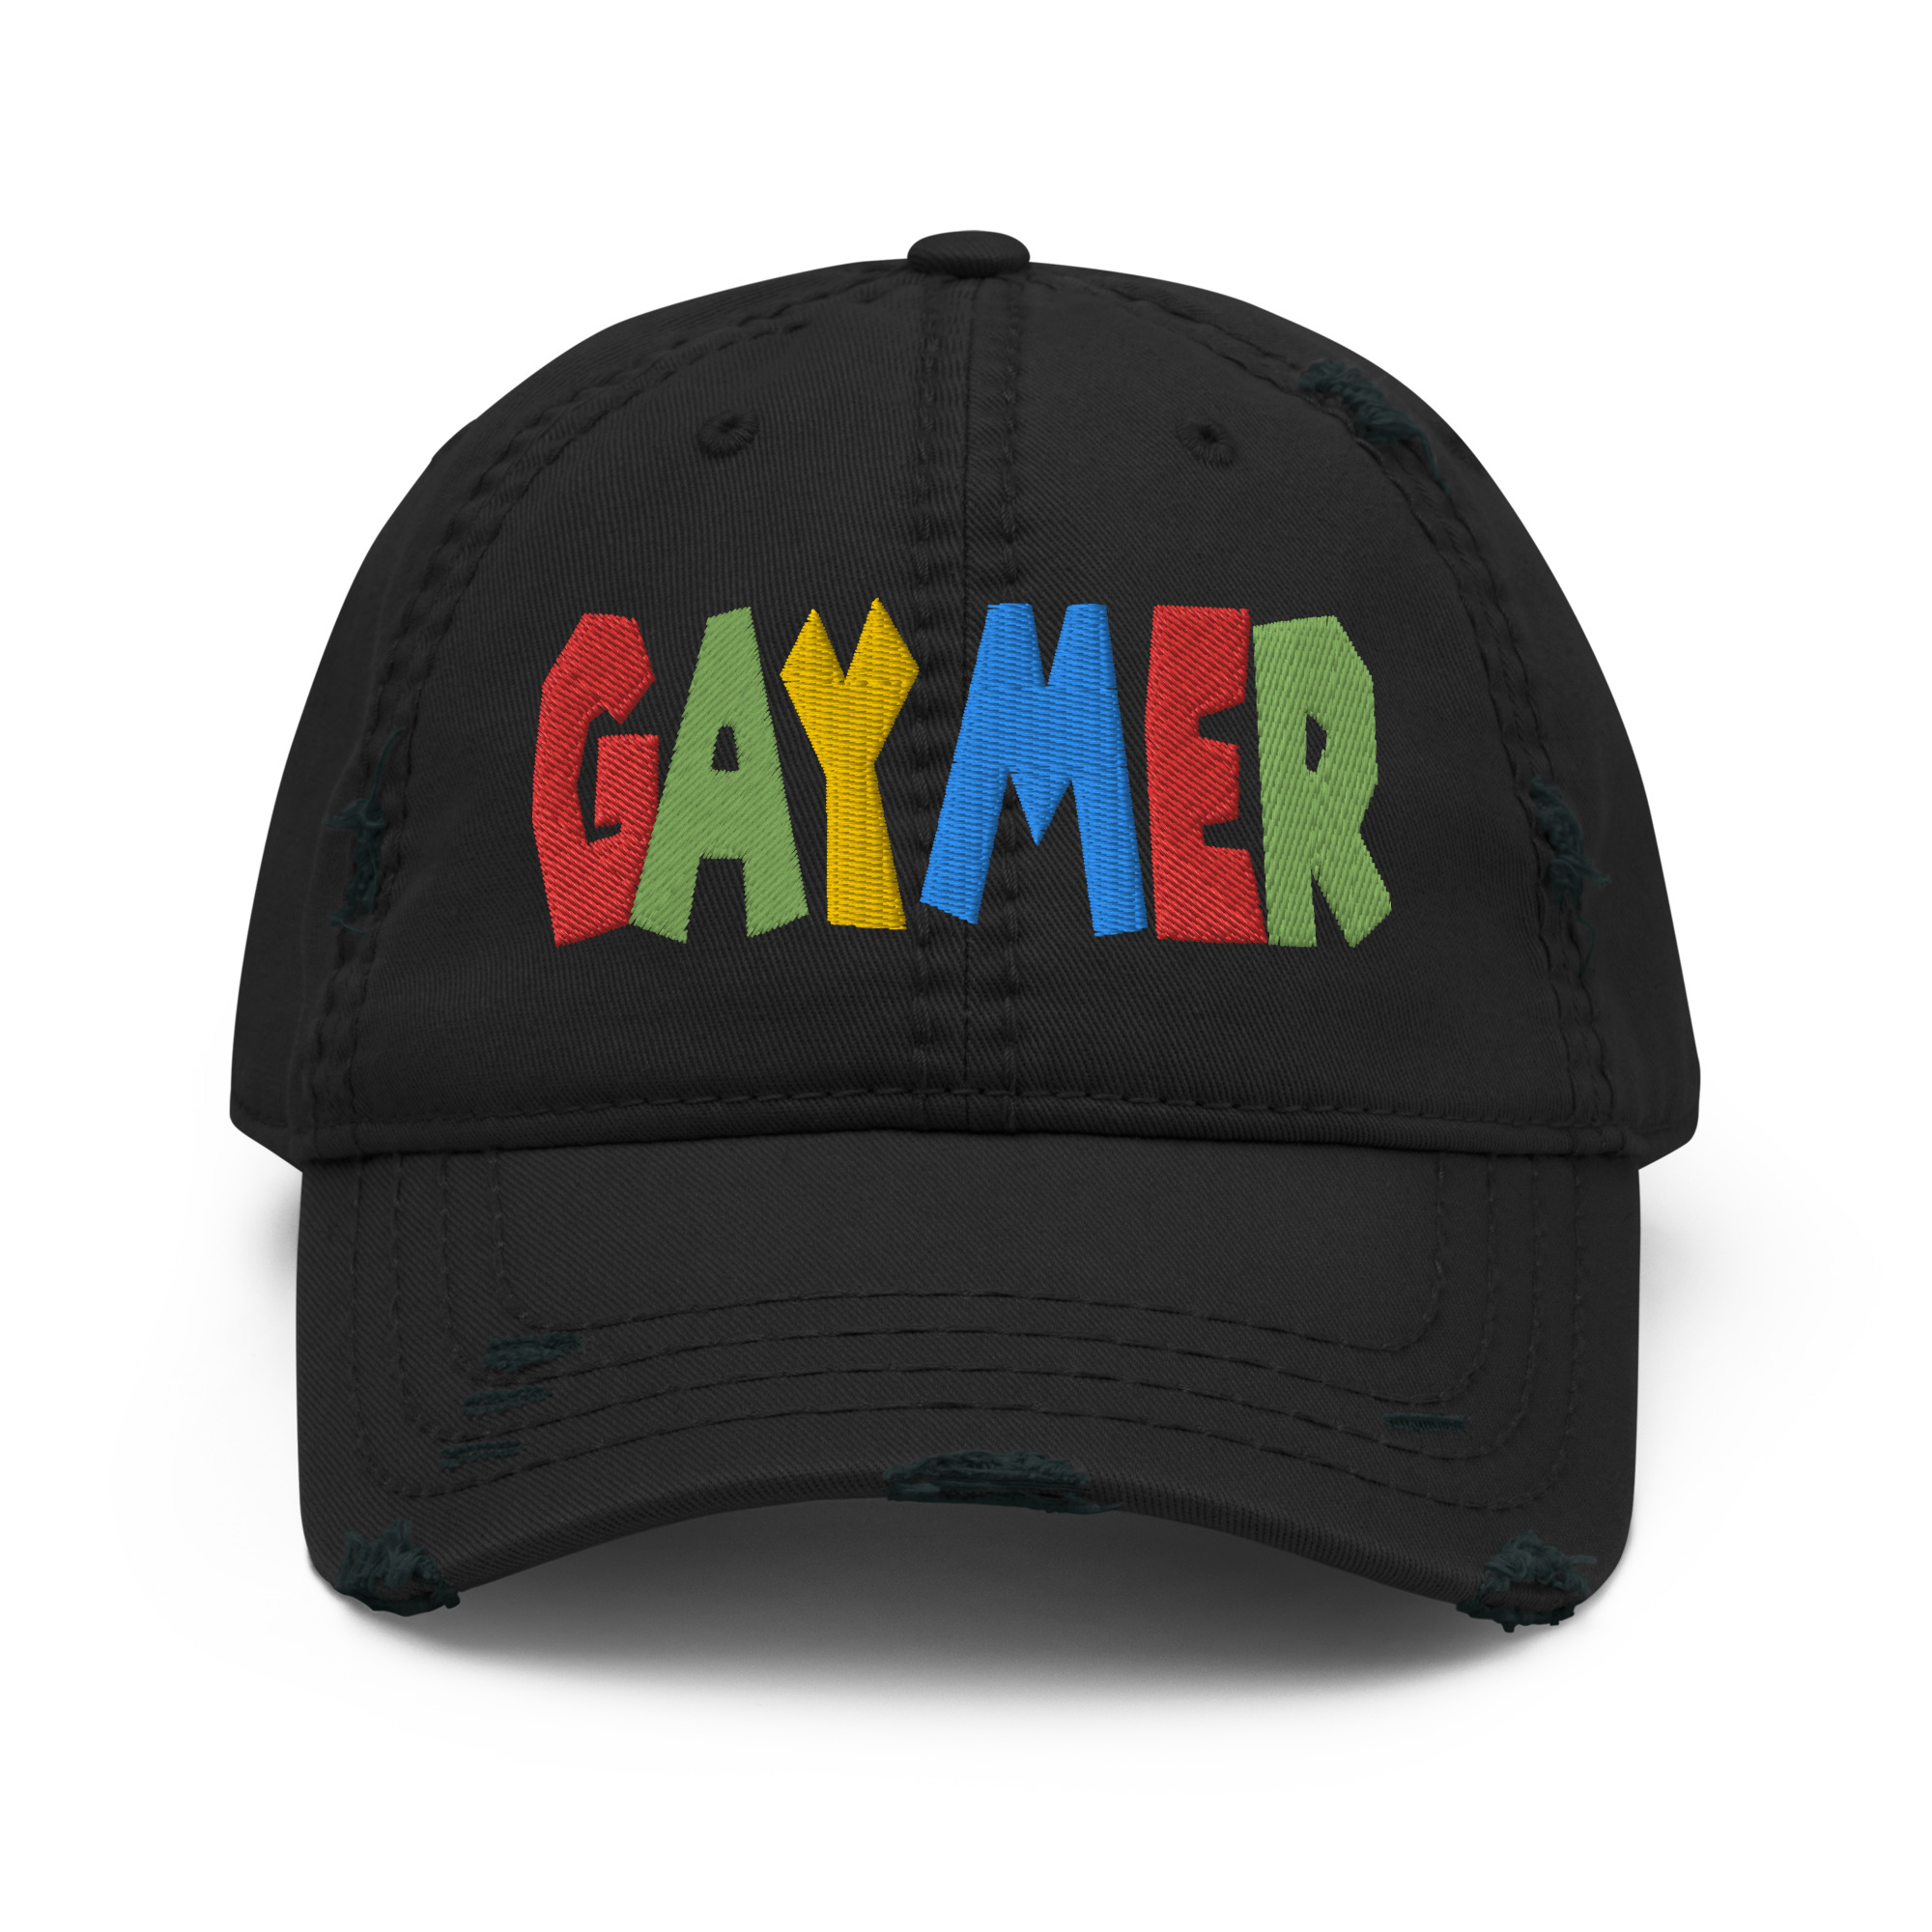 Featured image for “GAYMER - Distressed Dad Hat”